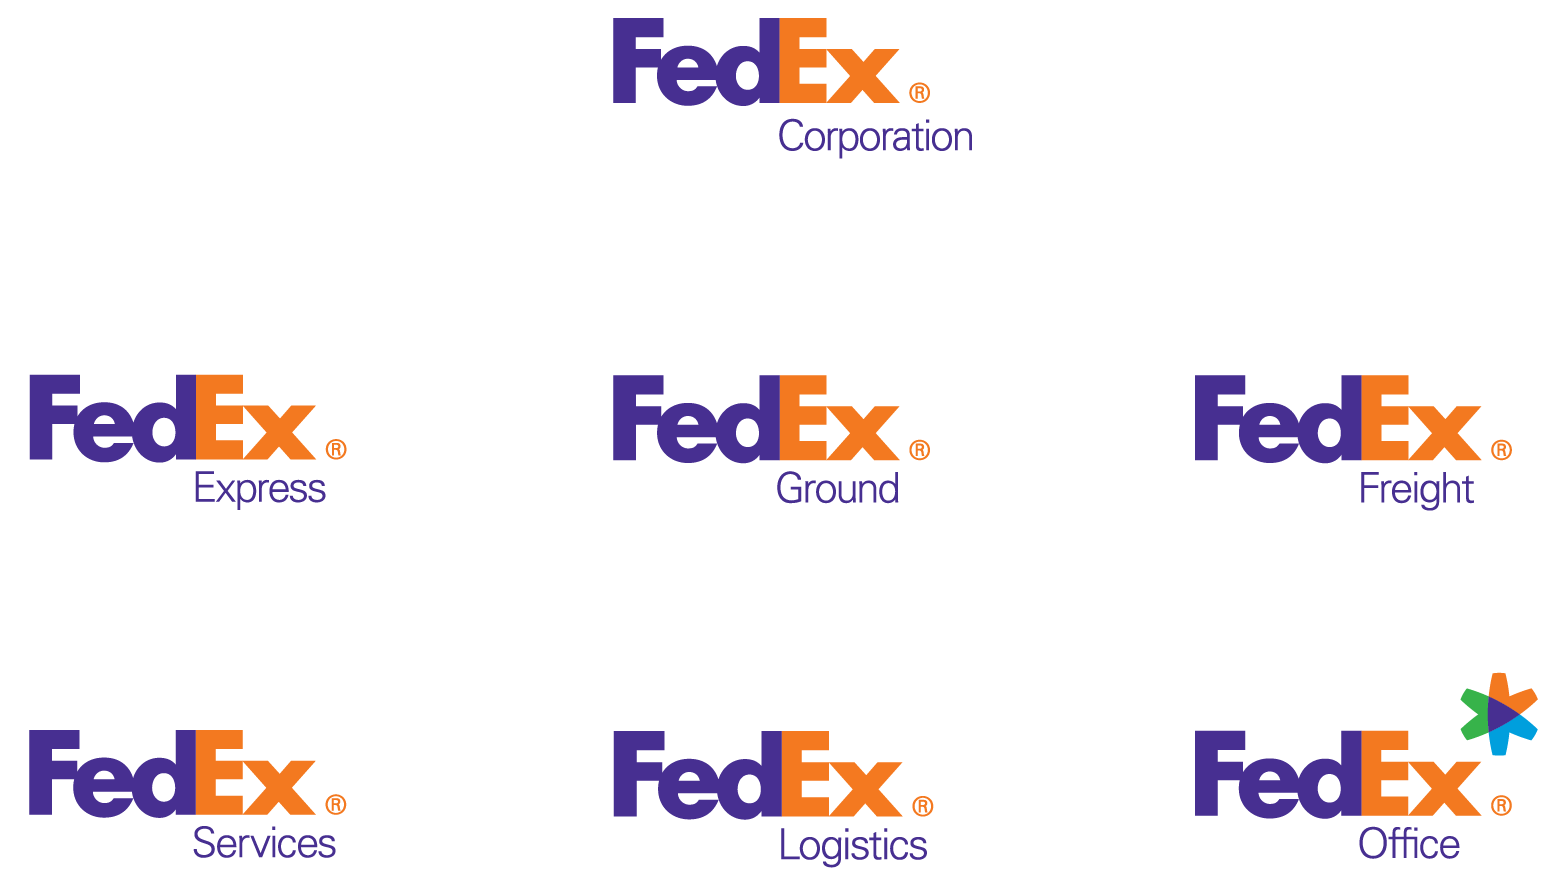 FedEx Air Logo - Company Structure and Facts - About FedEx